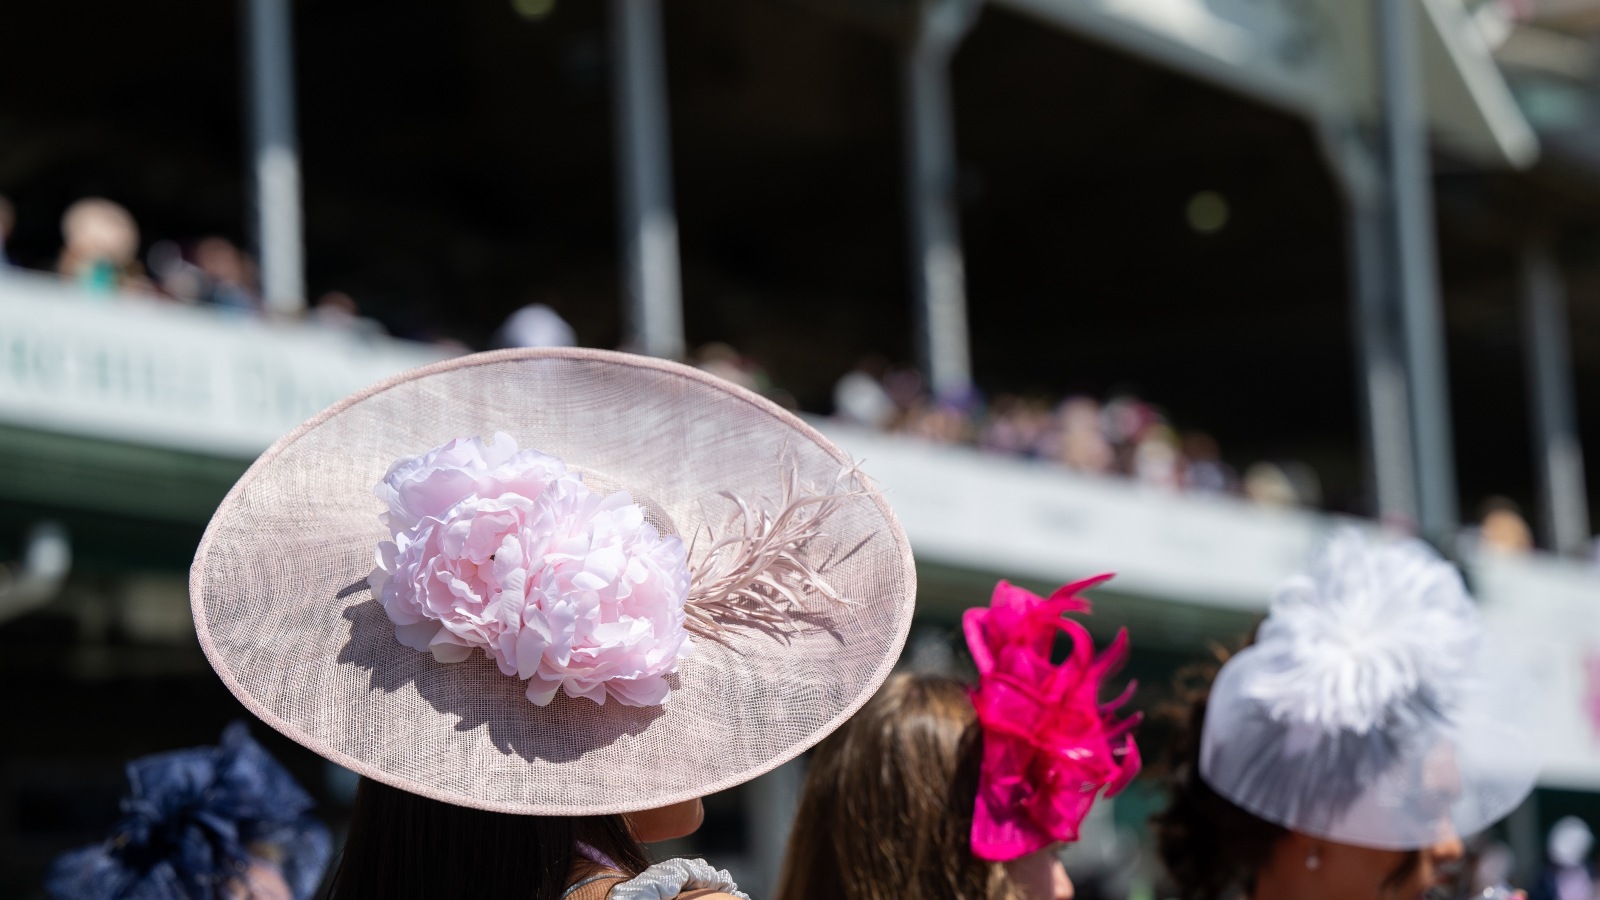 Elegant hats and fancy attire at the horse races